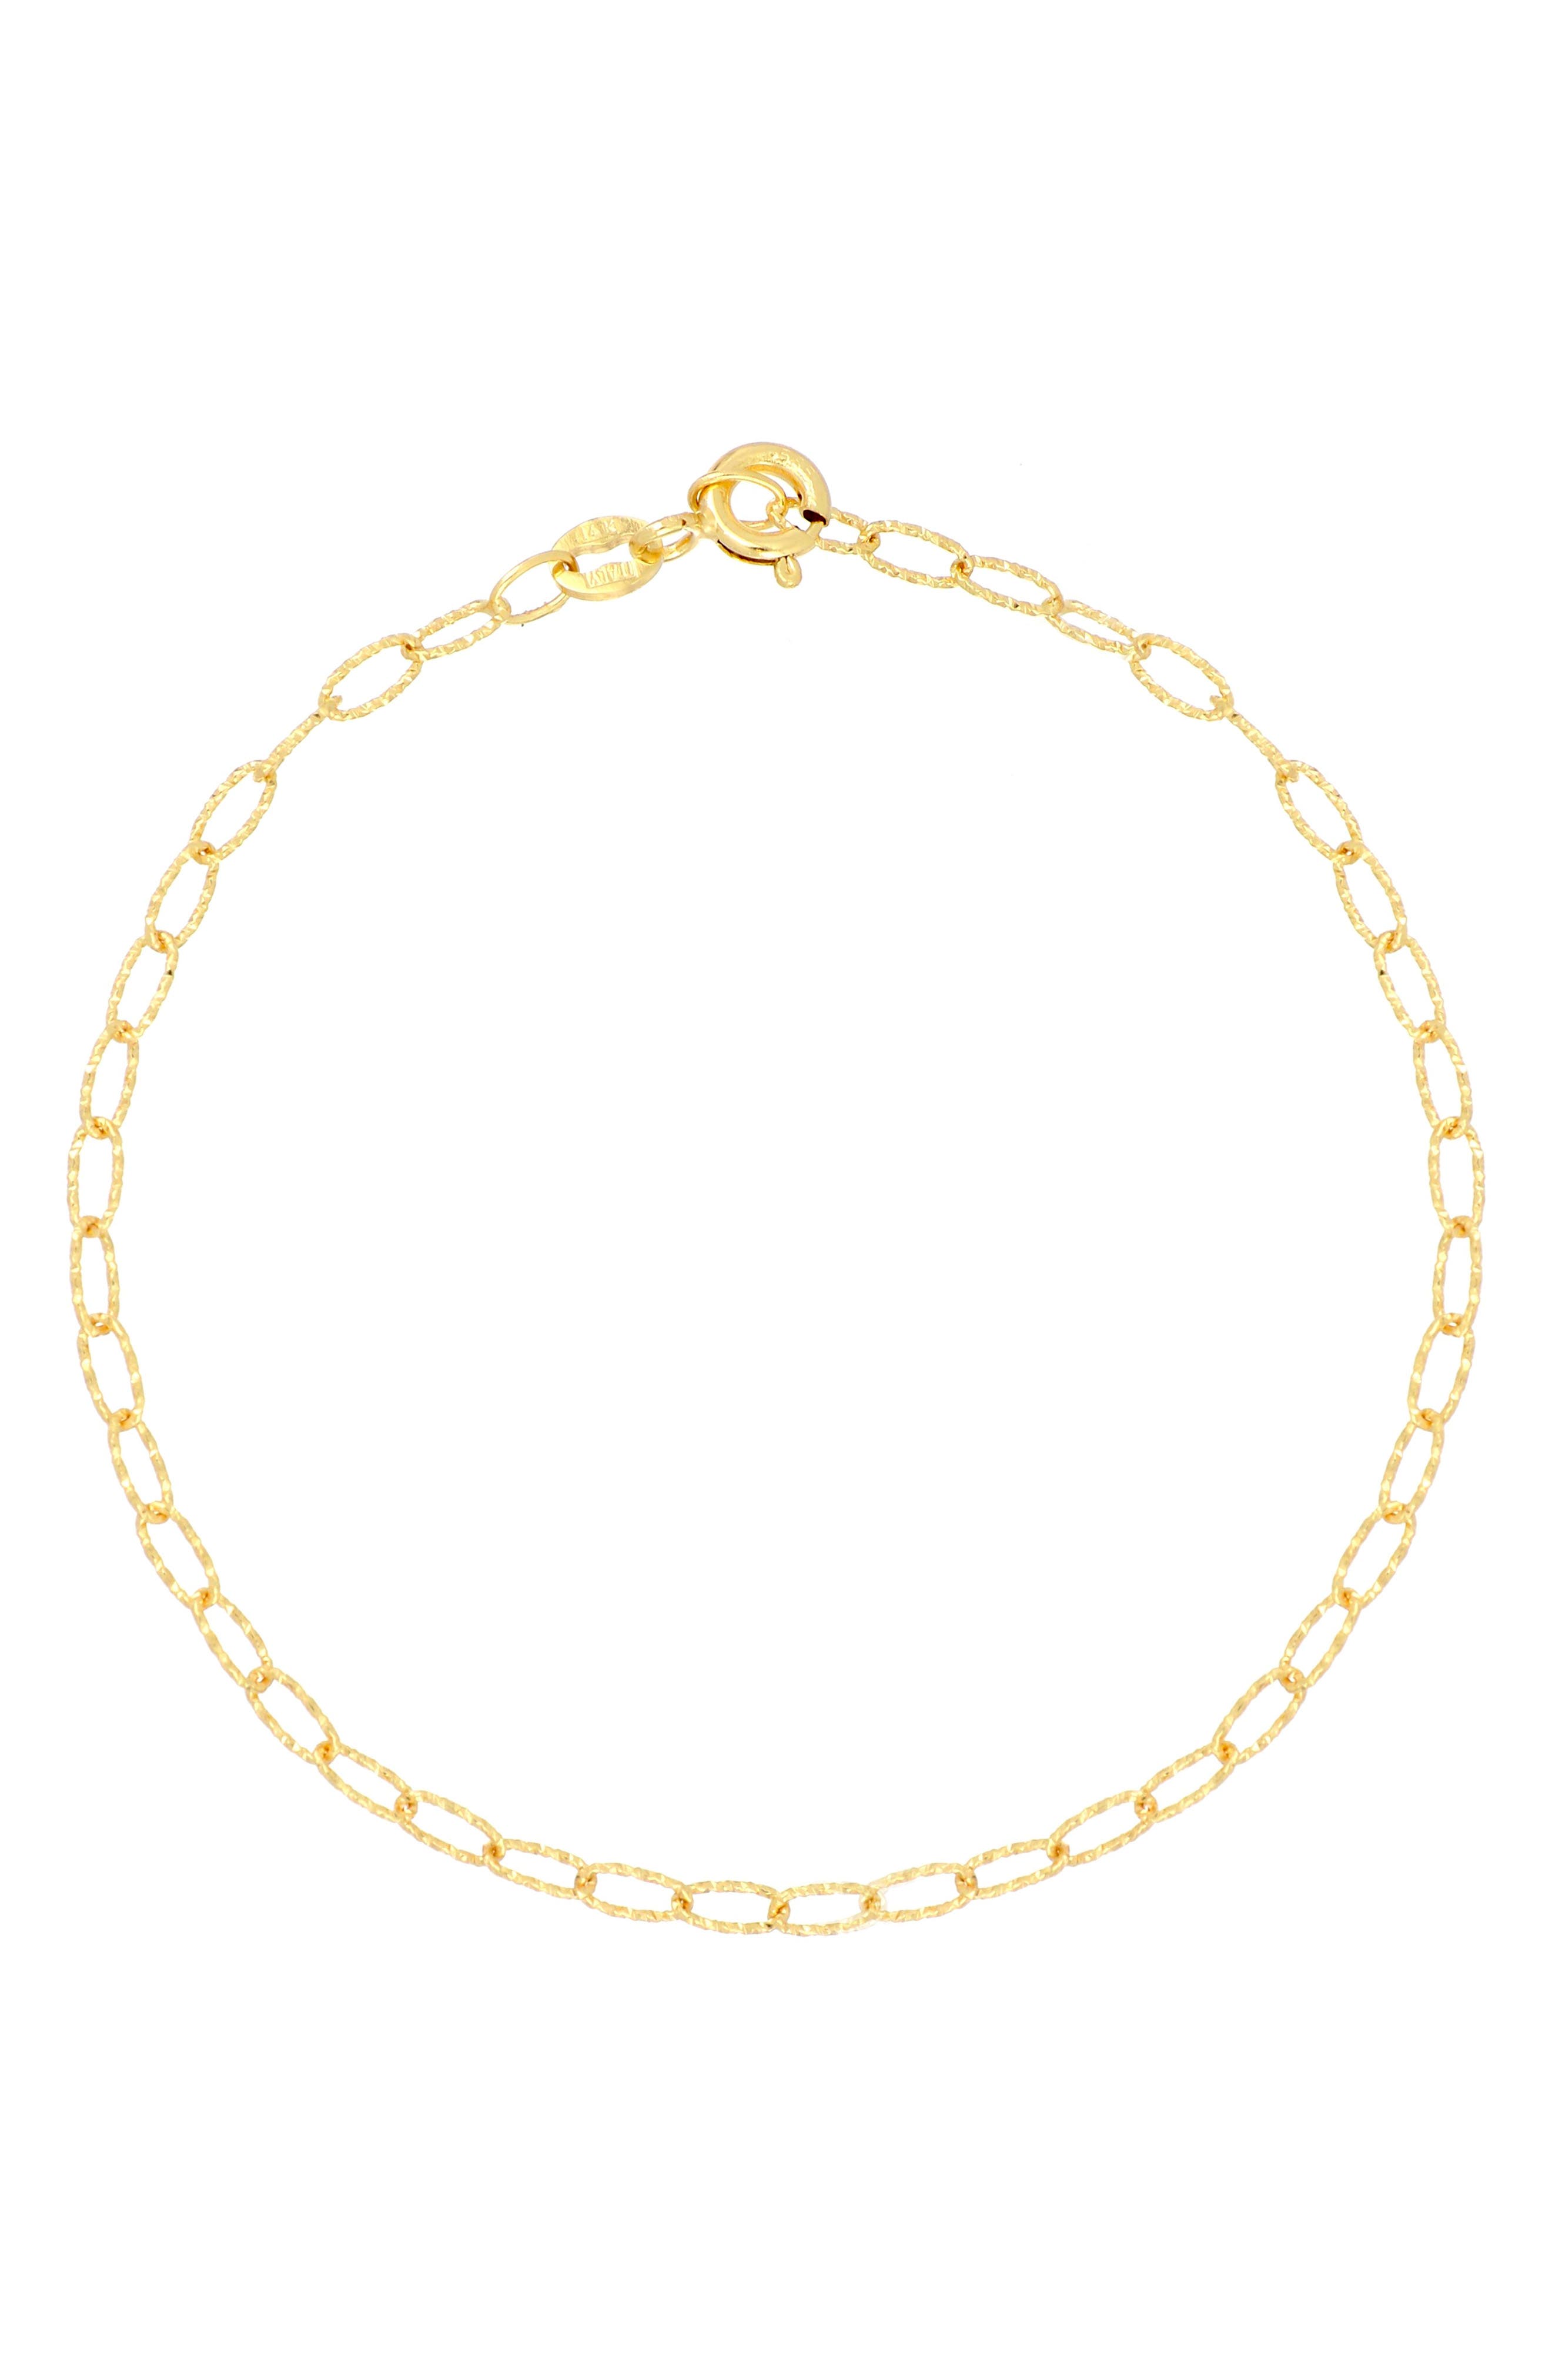 Anklet Flat Oval Coffee Bean Bead Stations 14k Yellow Gold Adjustable Length 